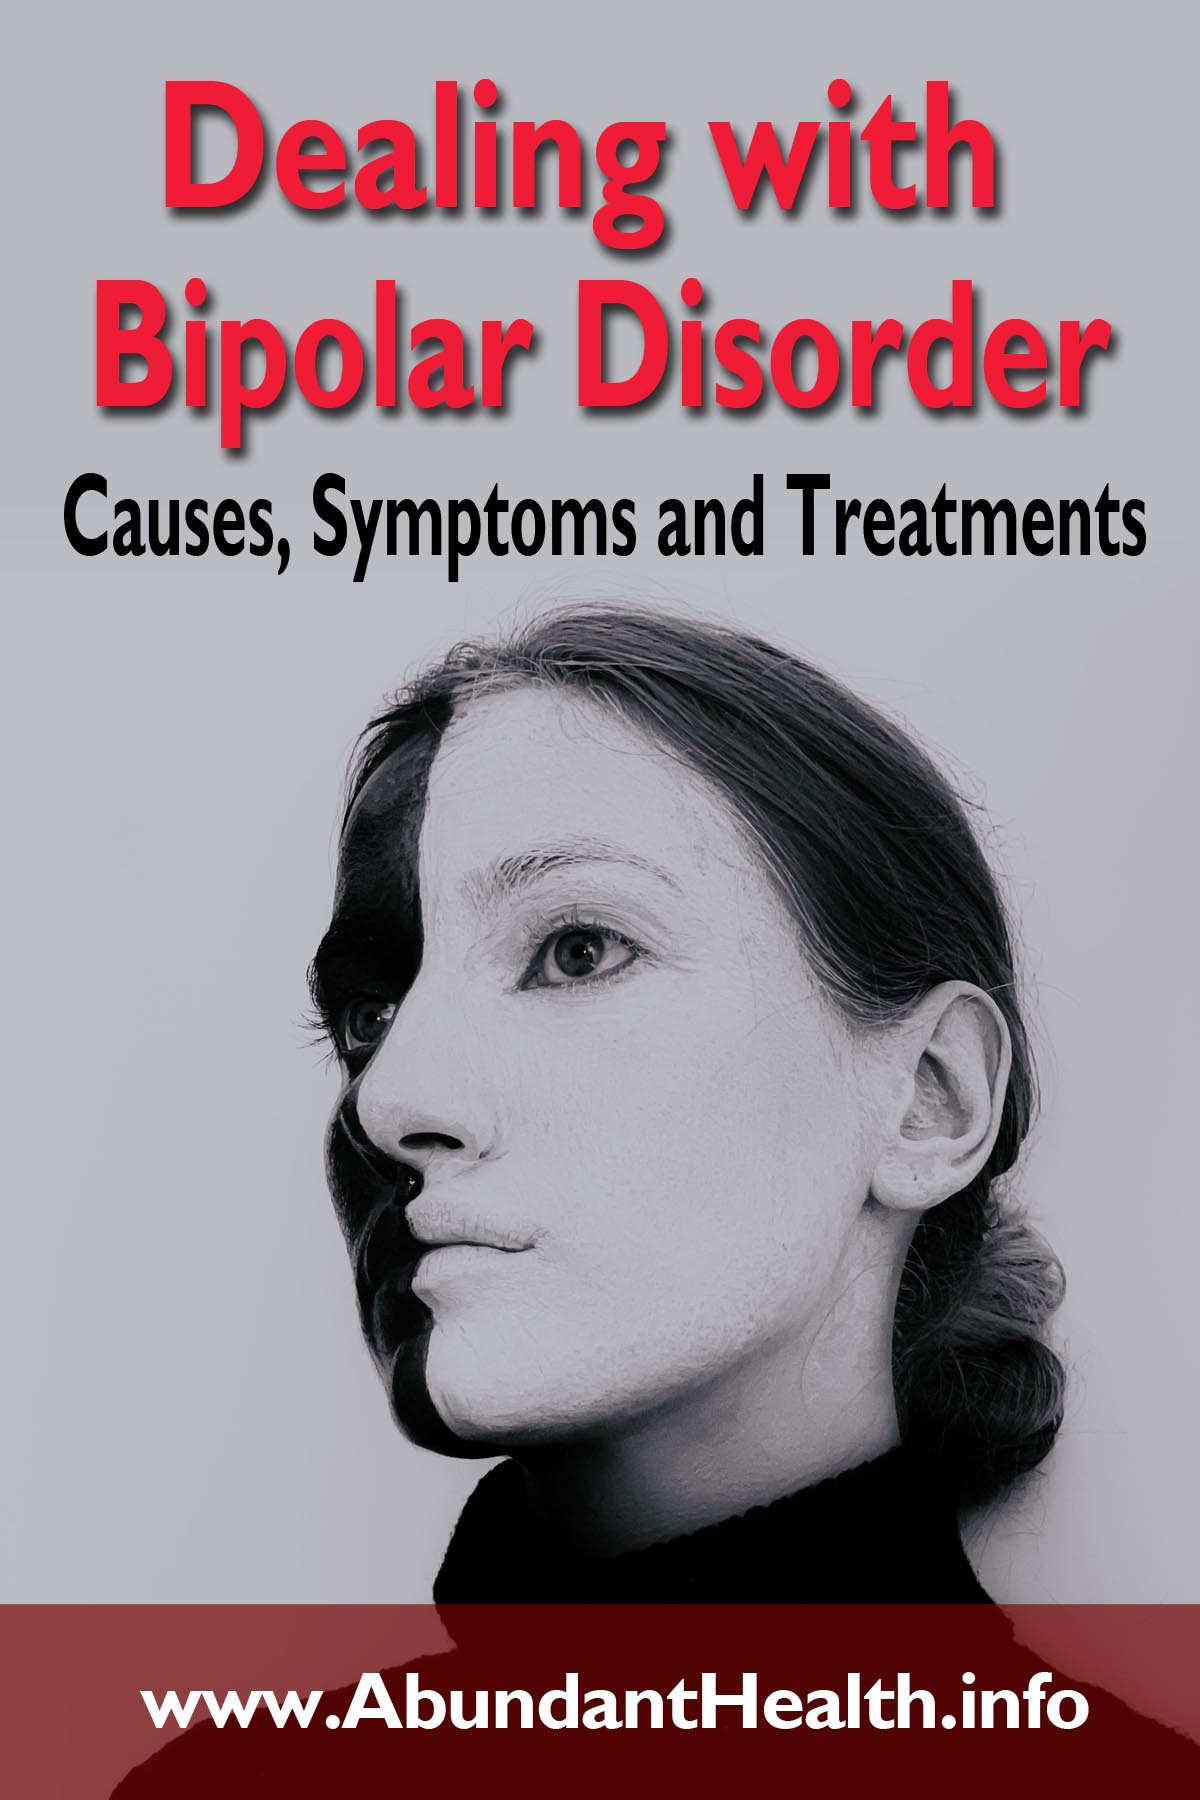 Dealing with Bipolar Disorder: Causes, Symptoms and Treatments